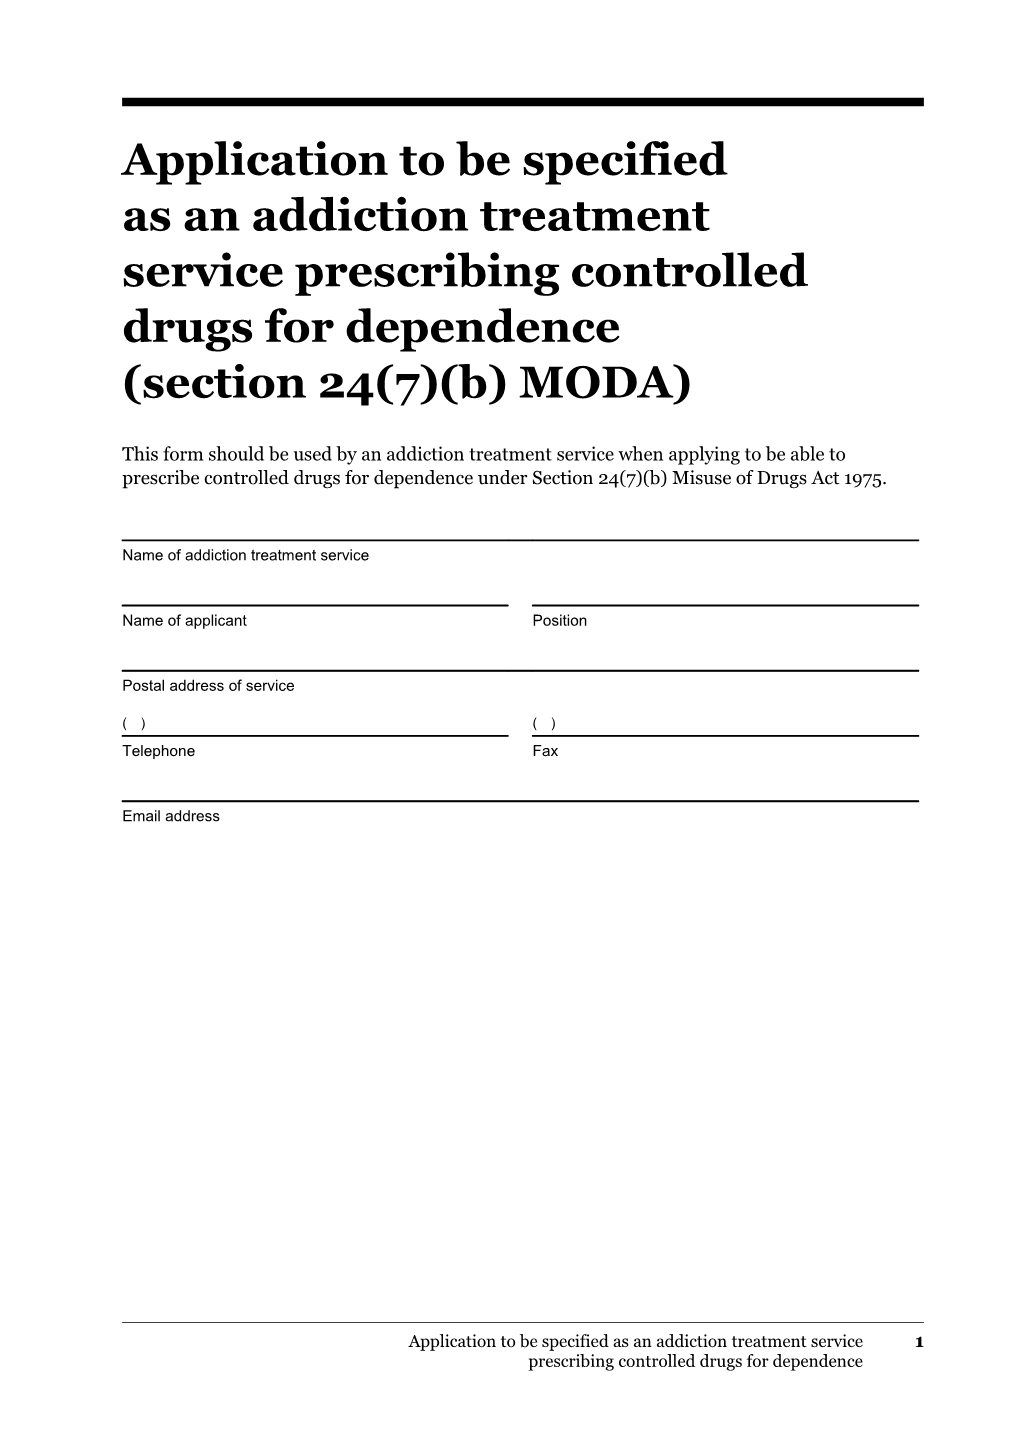 Application to Be Specified As an Addiction Treatment Service Prescribing Controlled Drugs